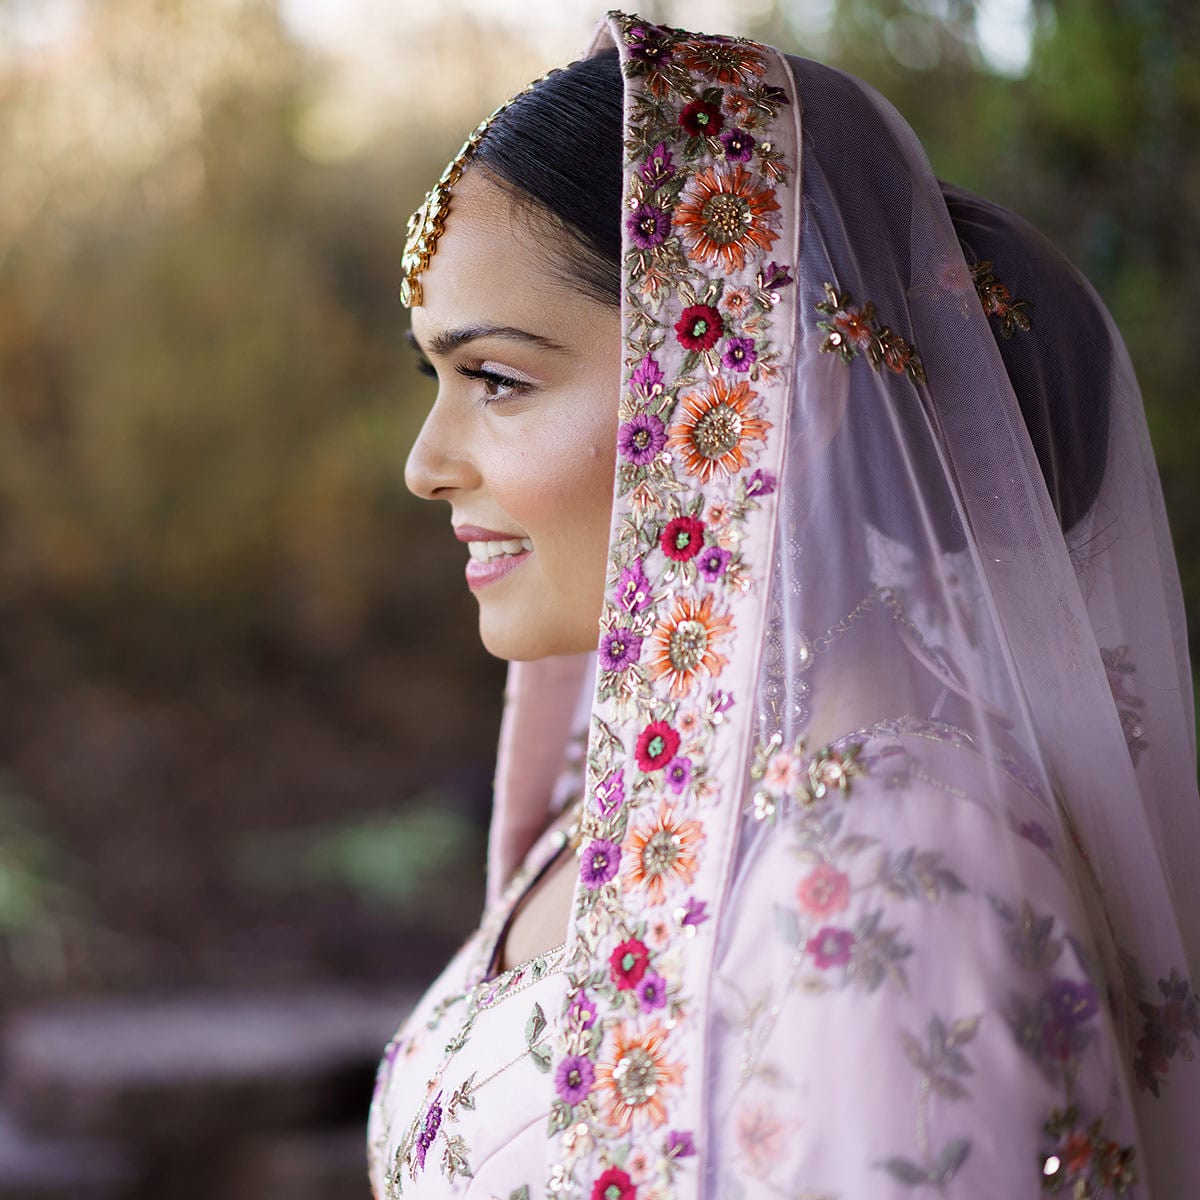 New York South Asian bridal makeup artists and hair stylists - Luxury Wedding Makeup - BRIDALGAL 